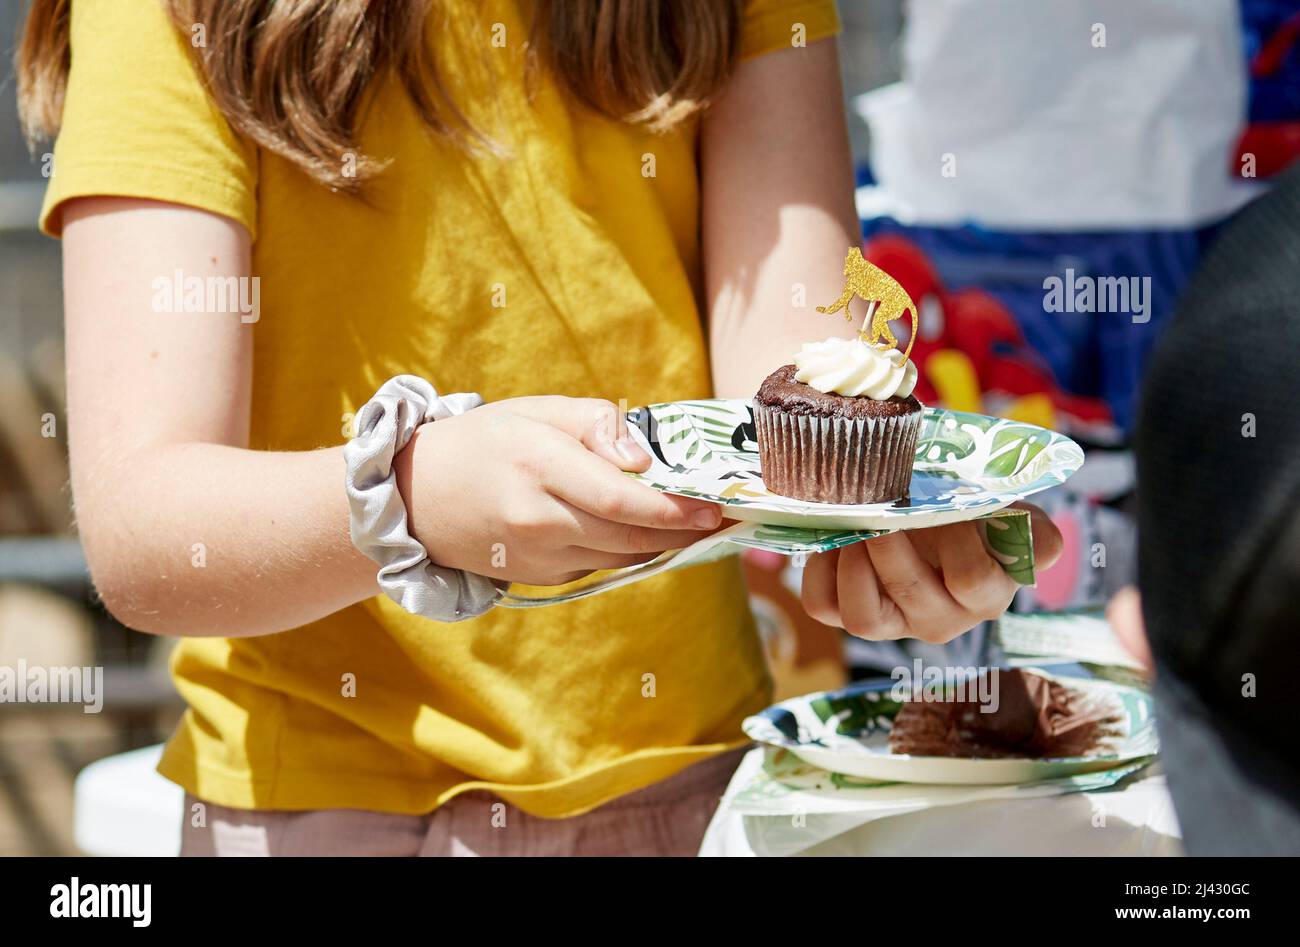 Young Girl holding a paper plate with a cupcake on it at a birthday party Stock Photo